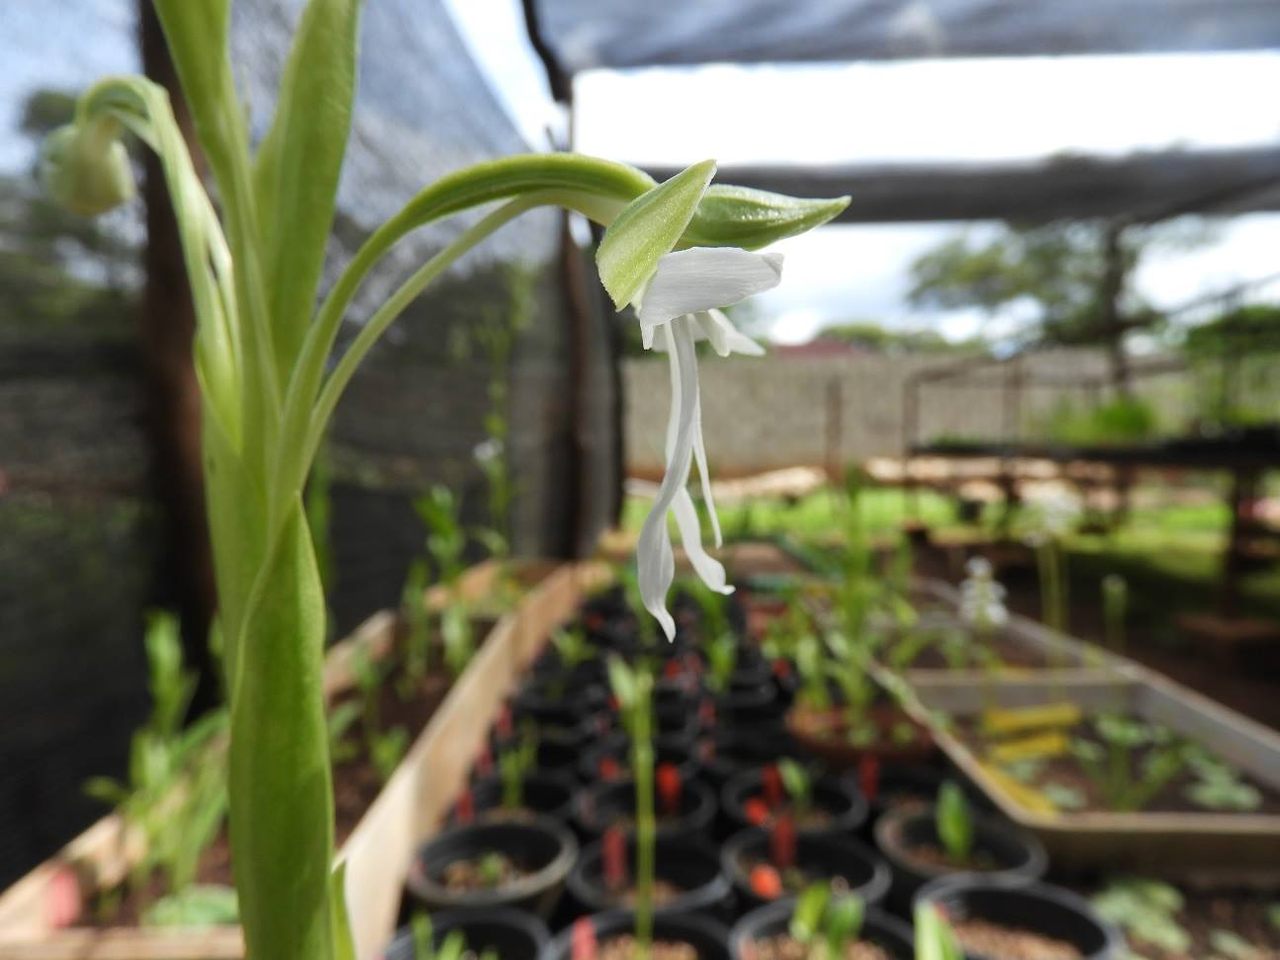 Researchers attempt to grow wild orchids in greenhouses.